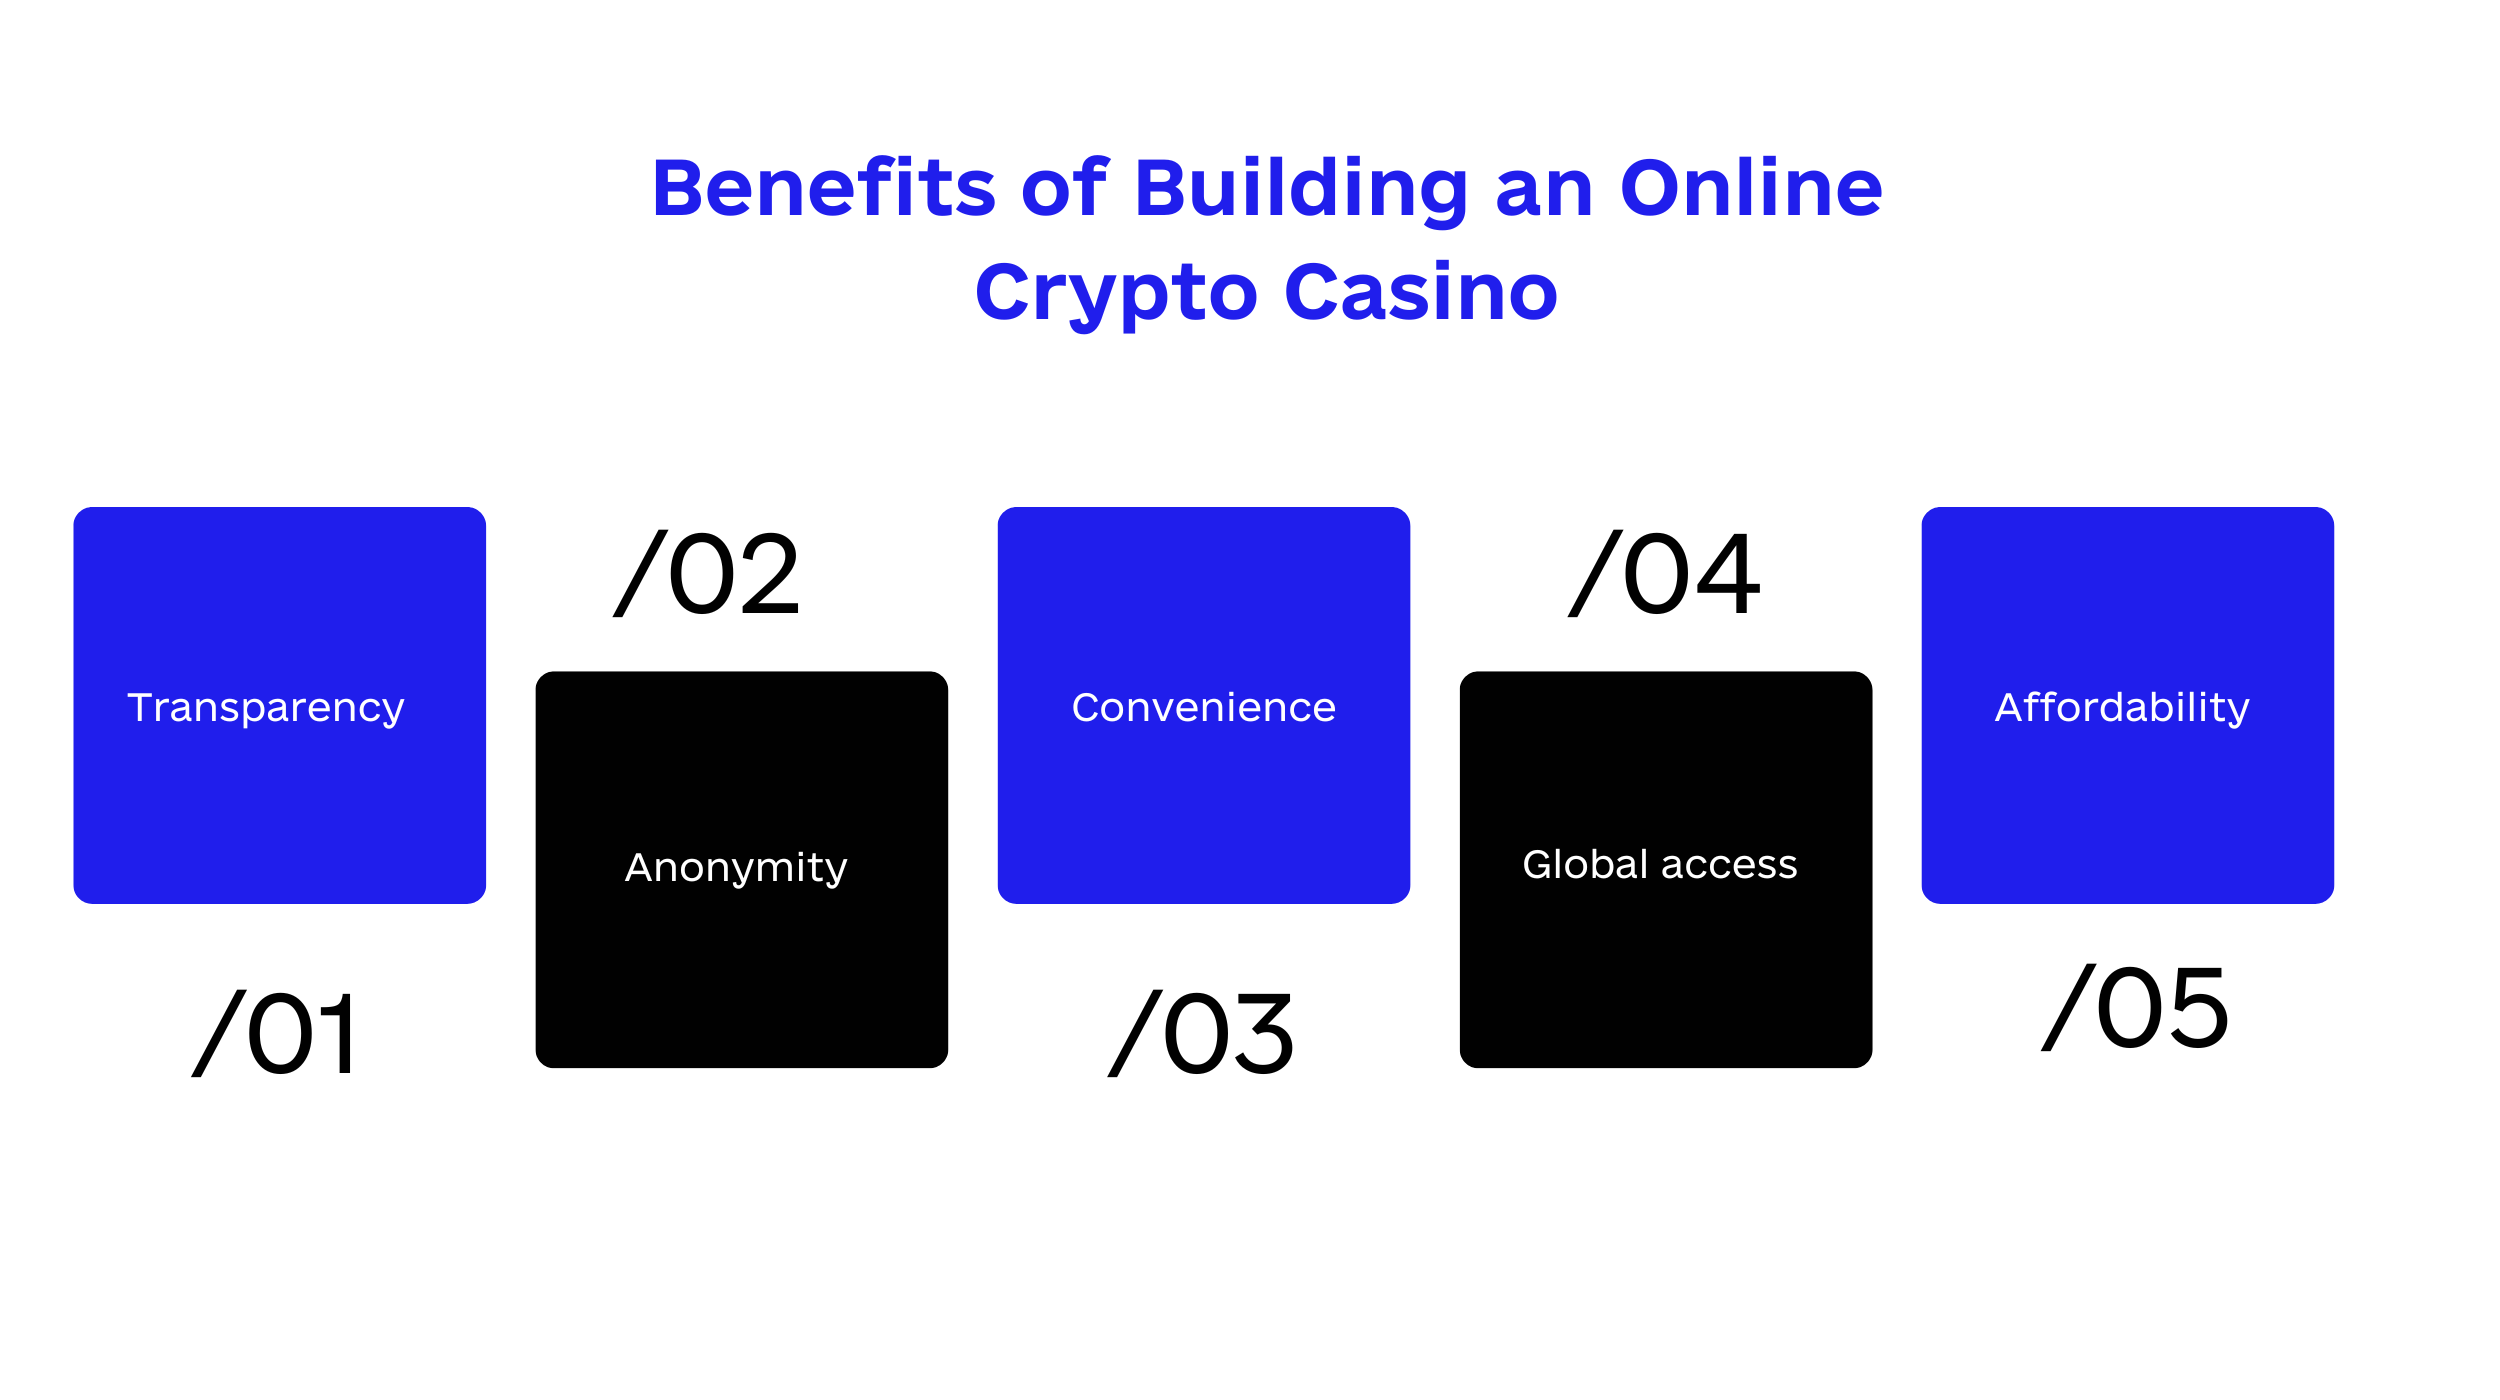 Benefits of Building an Online Crypto Casino